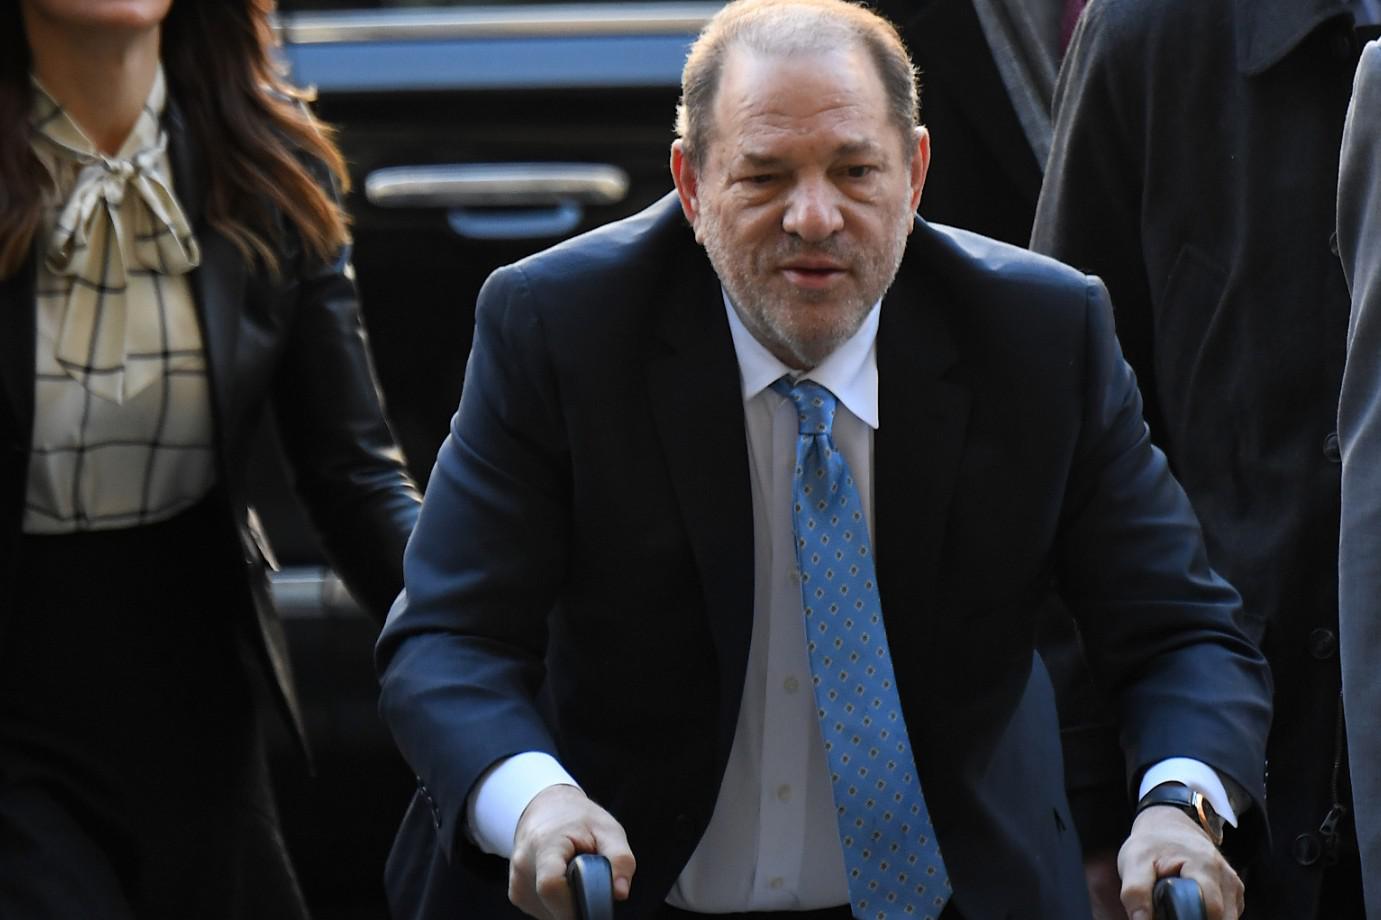 Harvey Weinstein’s Sex Crime Conviction Overturned: Legal News, Business Directories, Spiritual Services, and Tech Solutions in One Place.